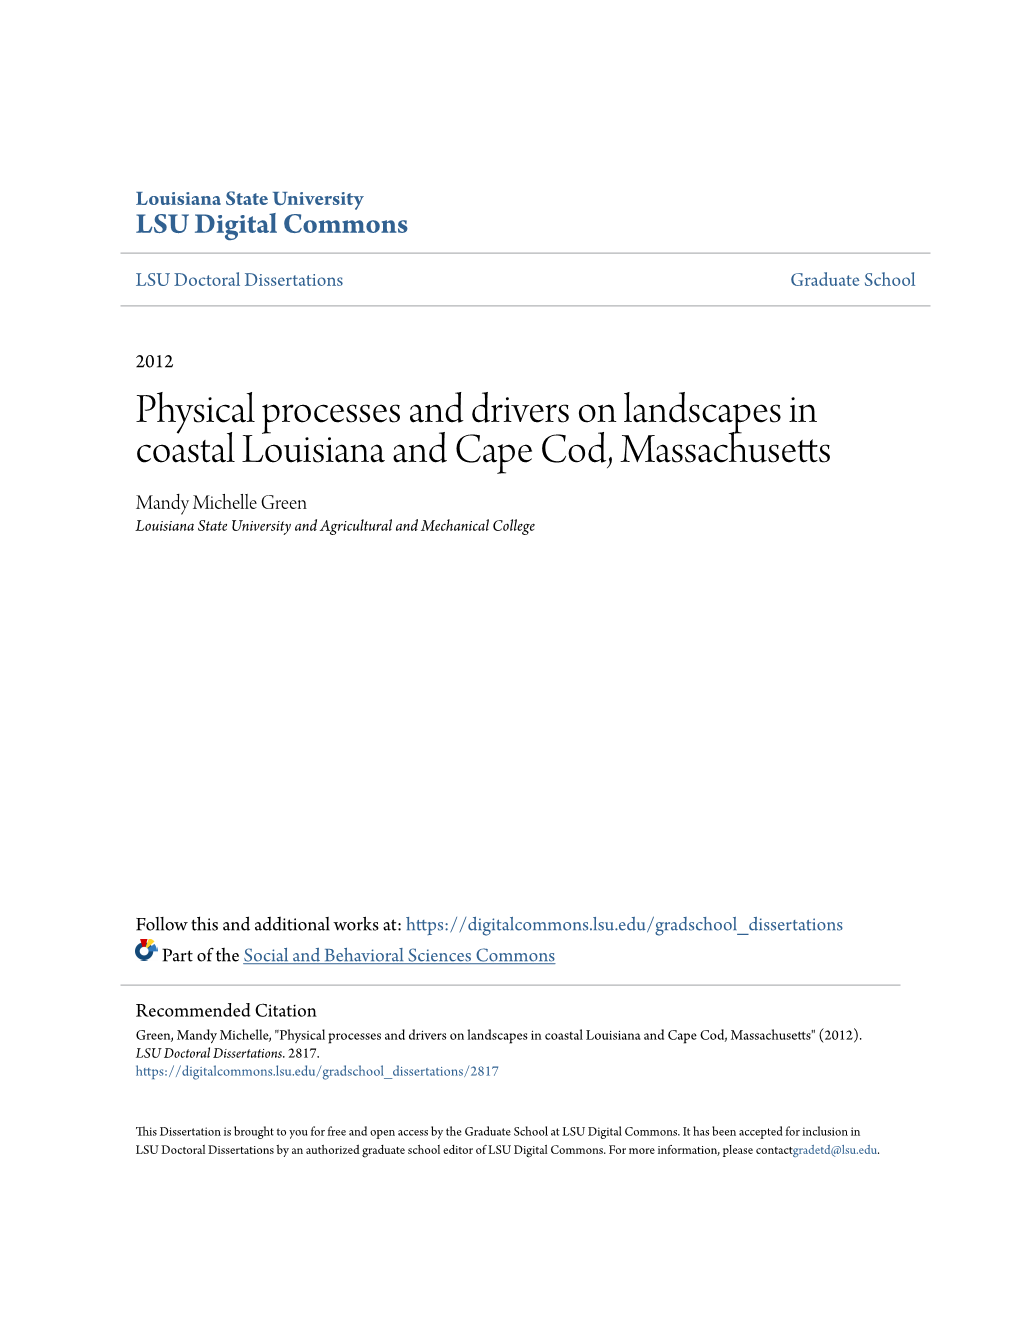 Physical Processes and Drivers on Landscapes in Coastal Louisiana